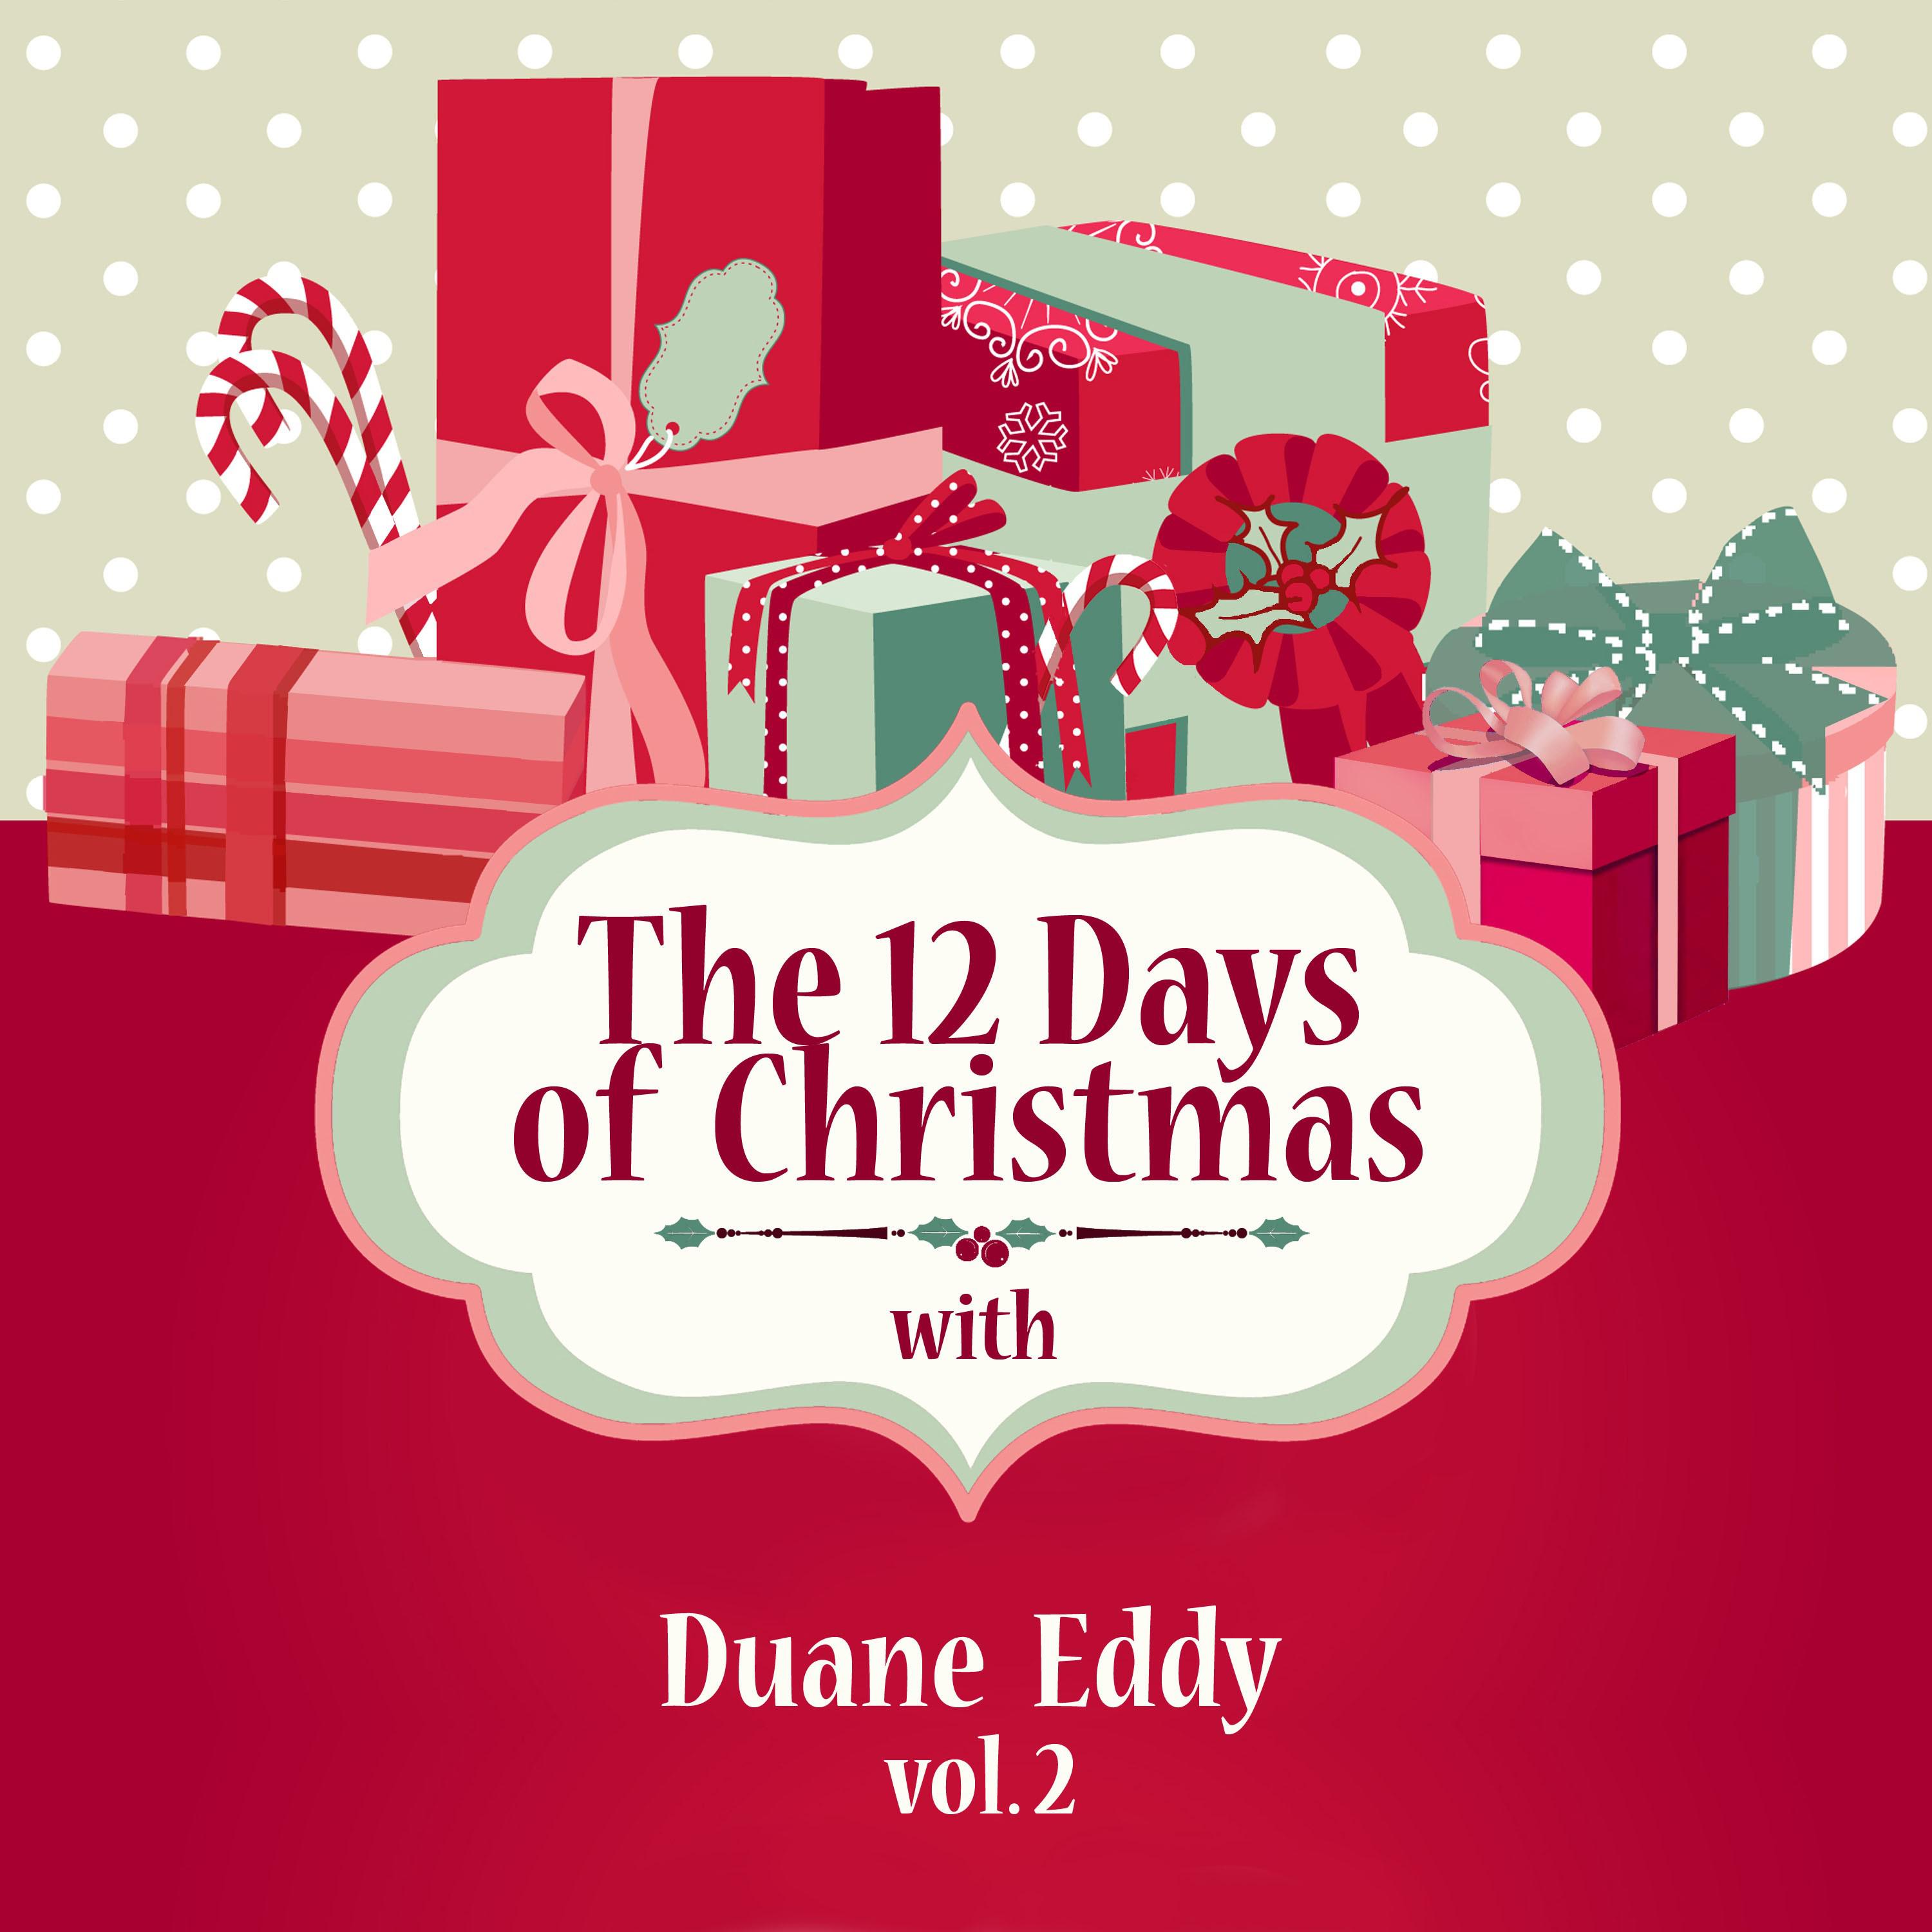 The 12 Days of Christmas with Duane Eddy, Vol. 2